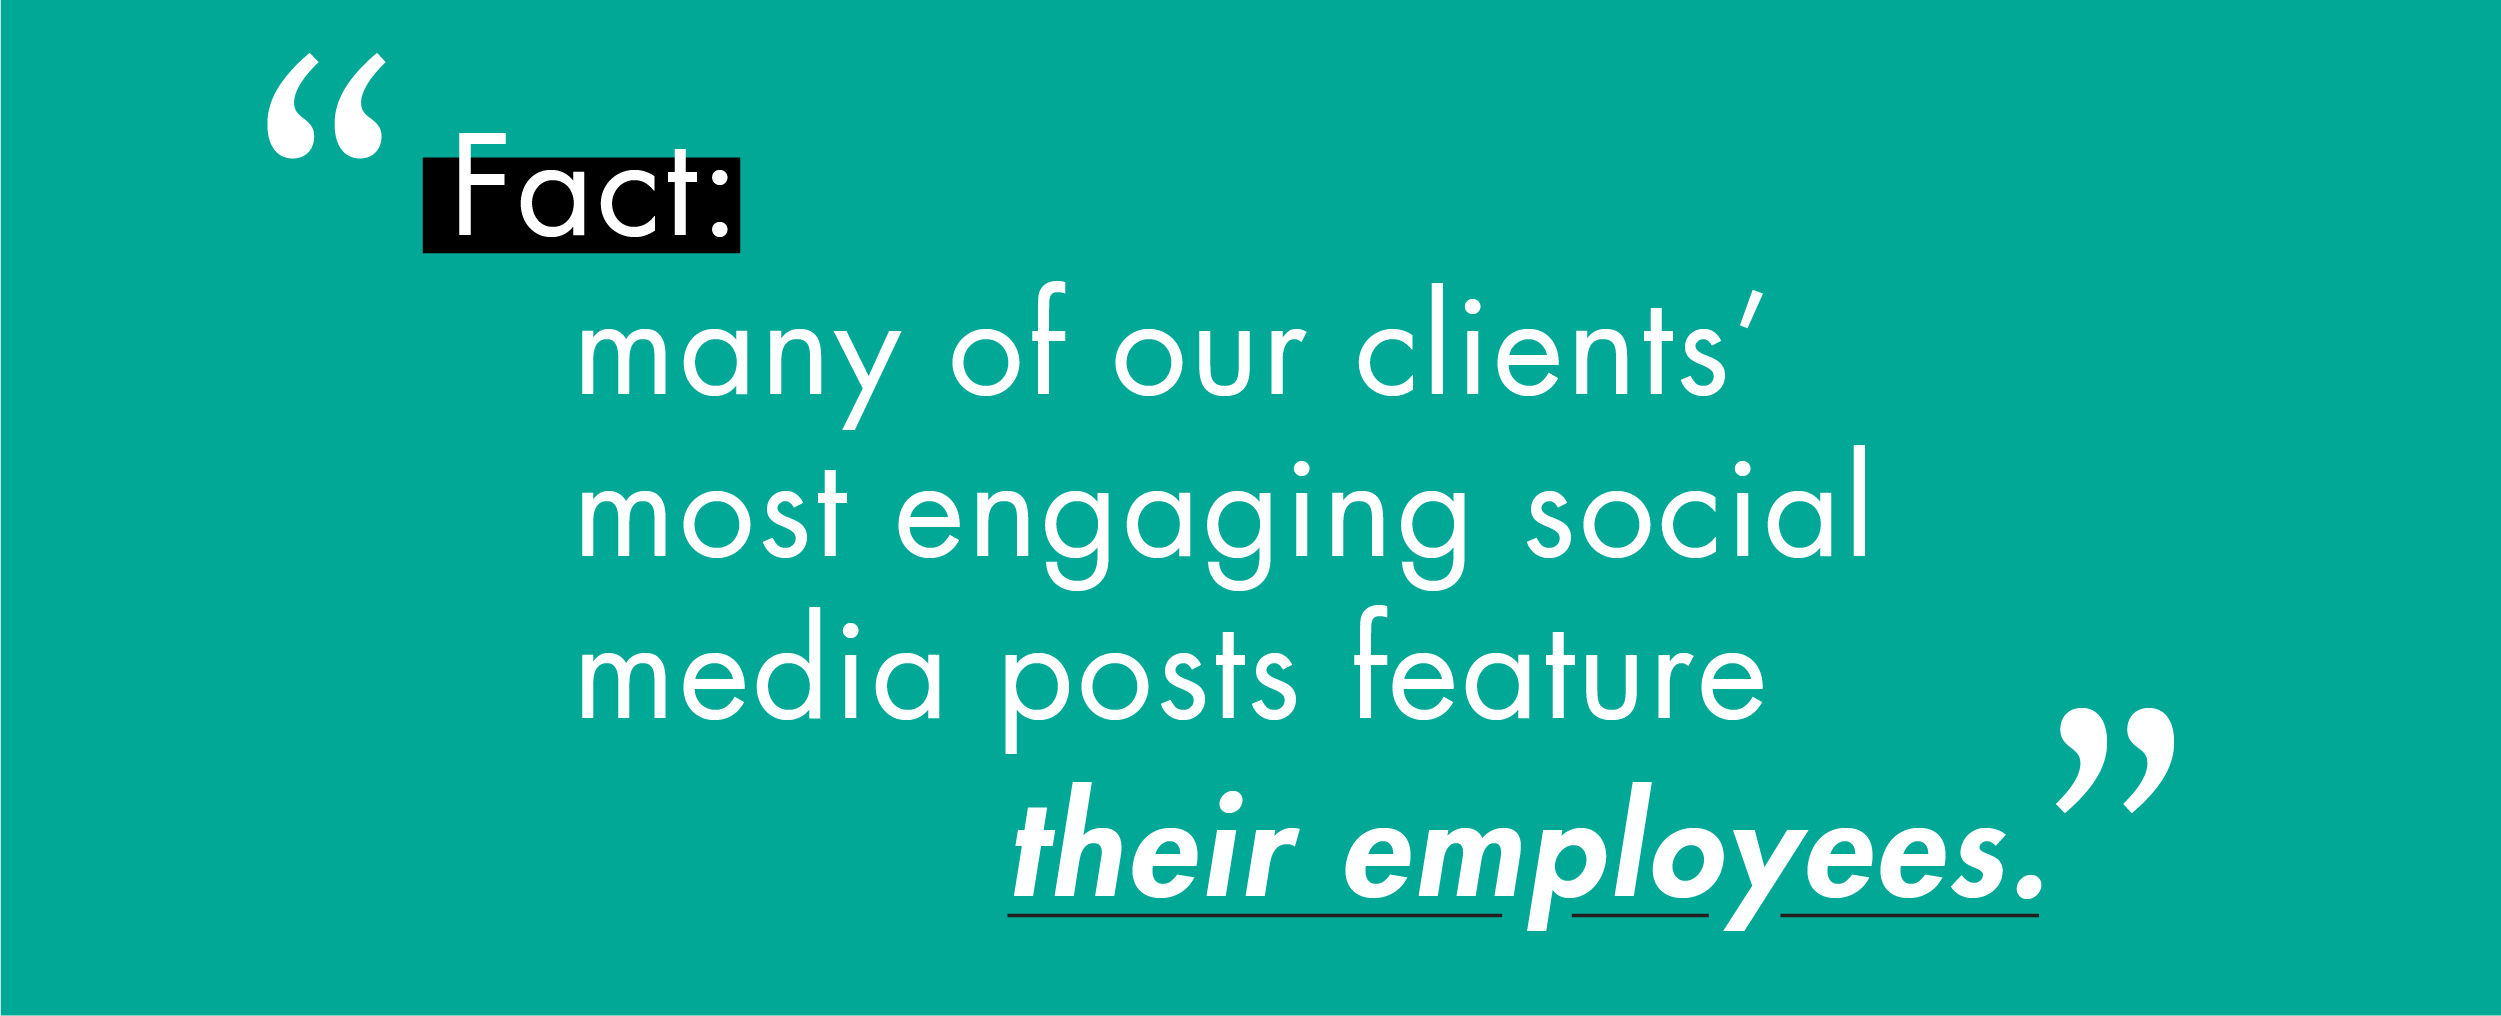 “Fact: many of our clients' most engaging social media posts feature their employees”